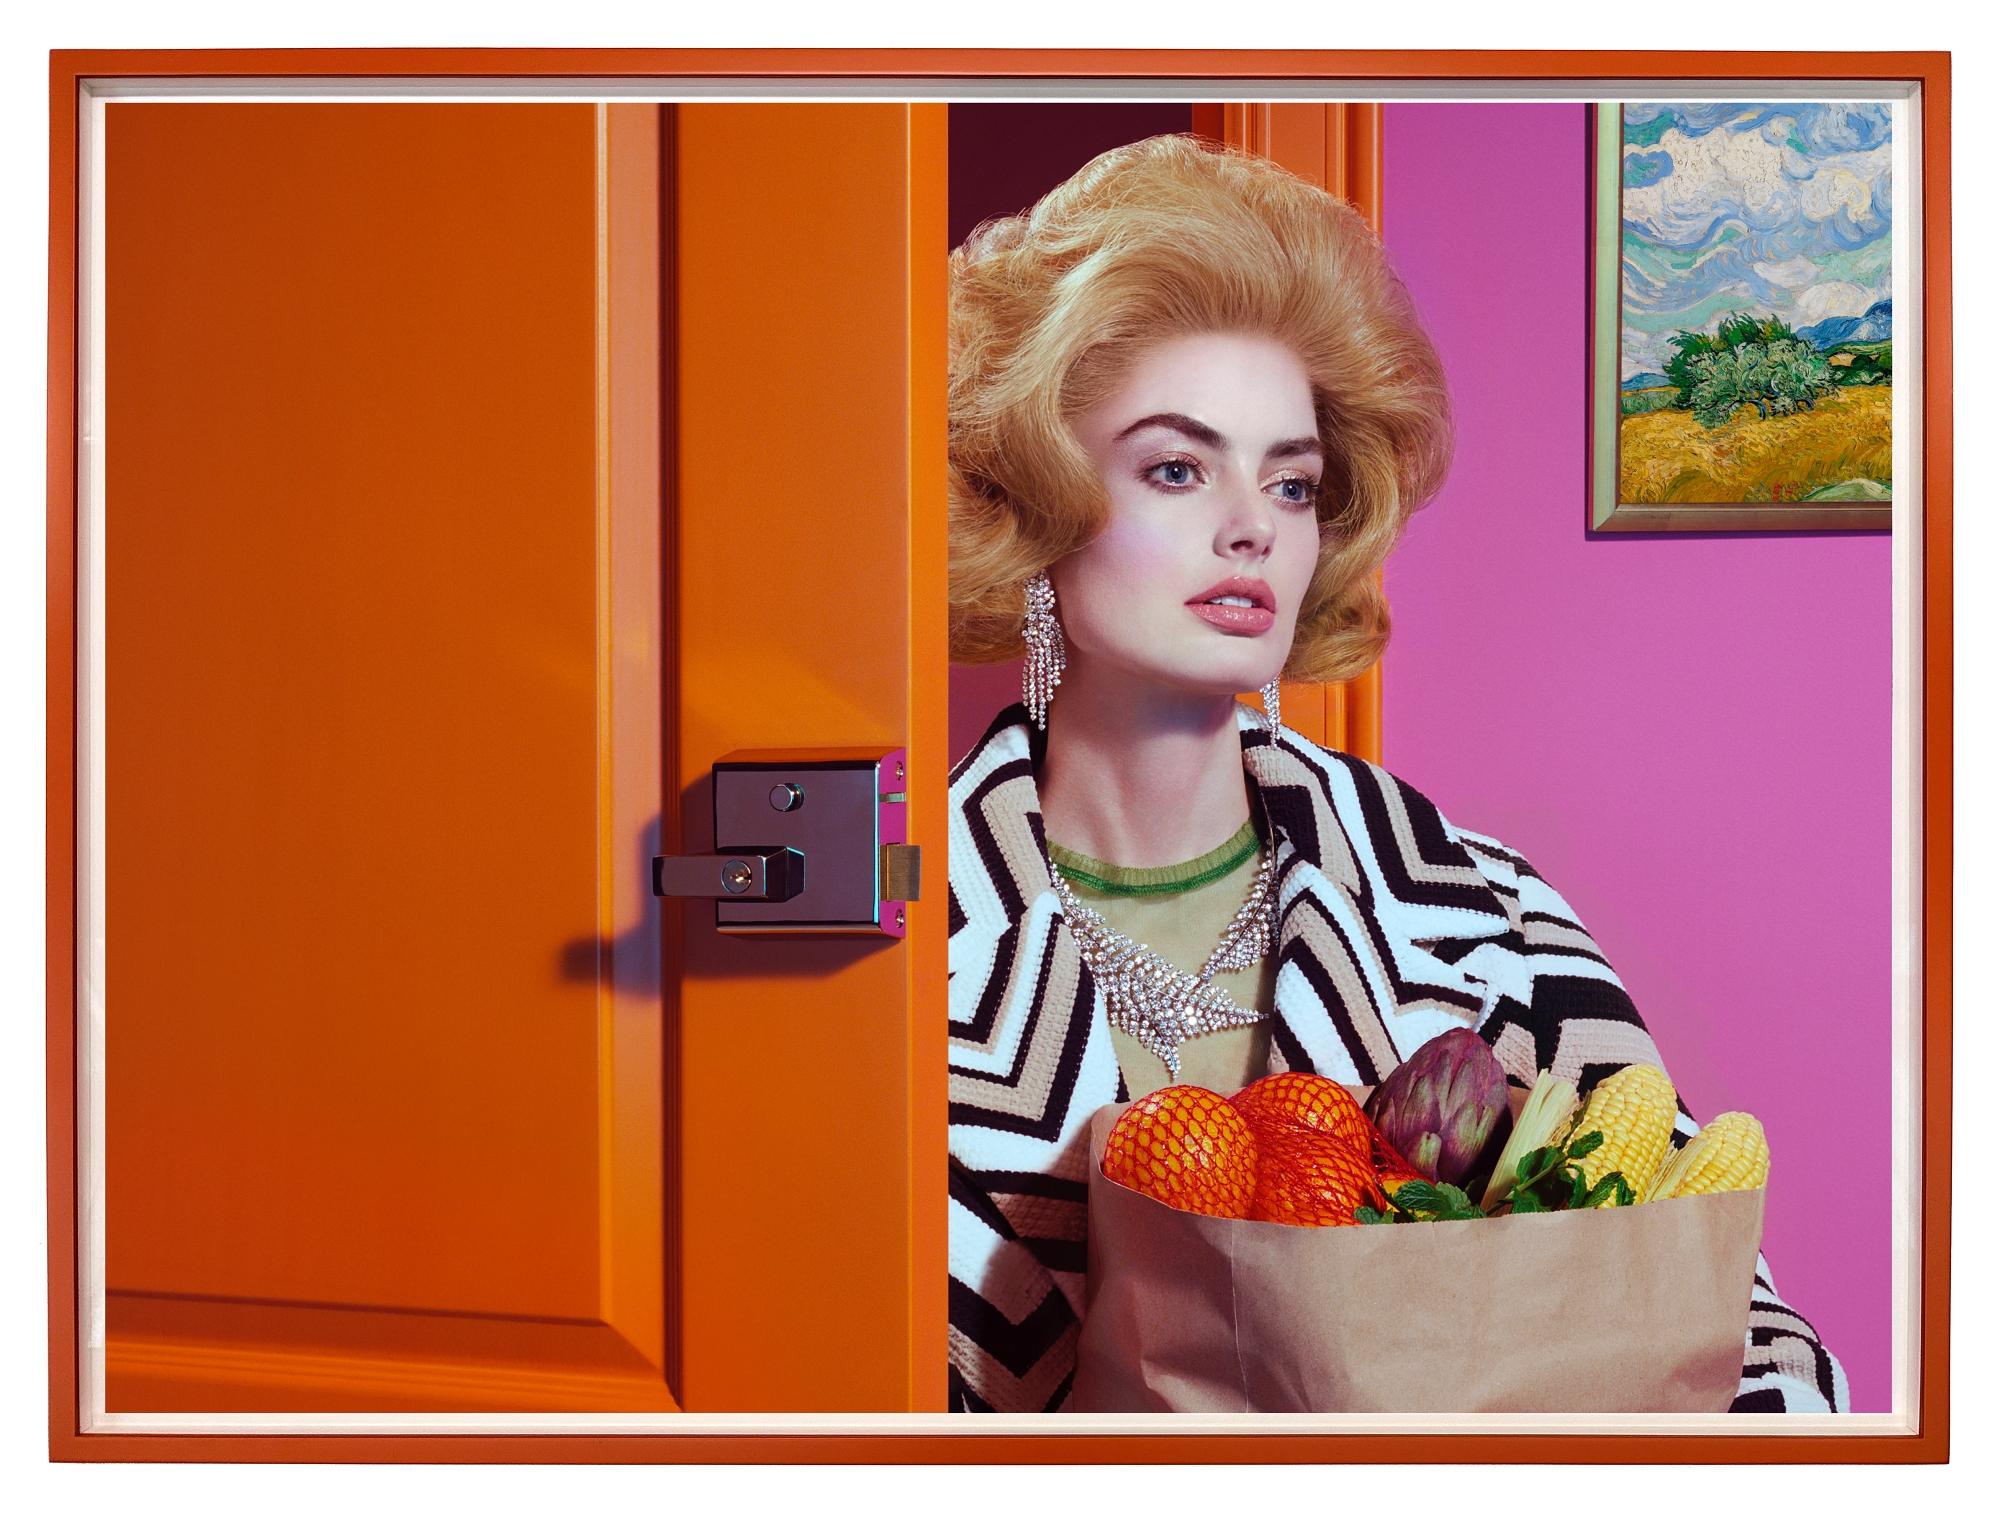 MILES ALDRIDGE (*1964, Great Britain) 
Doors #2, 2023
Screenprint in colours
Sheet 73 x 100 cm (28 3/4 x 39 3/8 in.)
Edition of 15, plus 3 AP; Ed. no. 1/15
Print only


A fiercely original photographer, Miles Aldridge (*1964, Great Britain) is best